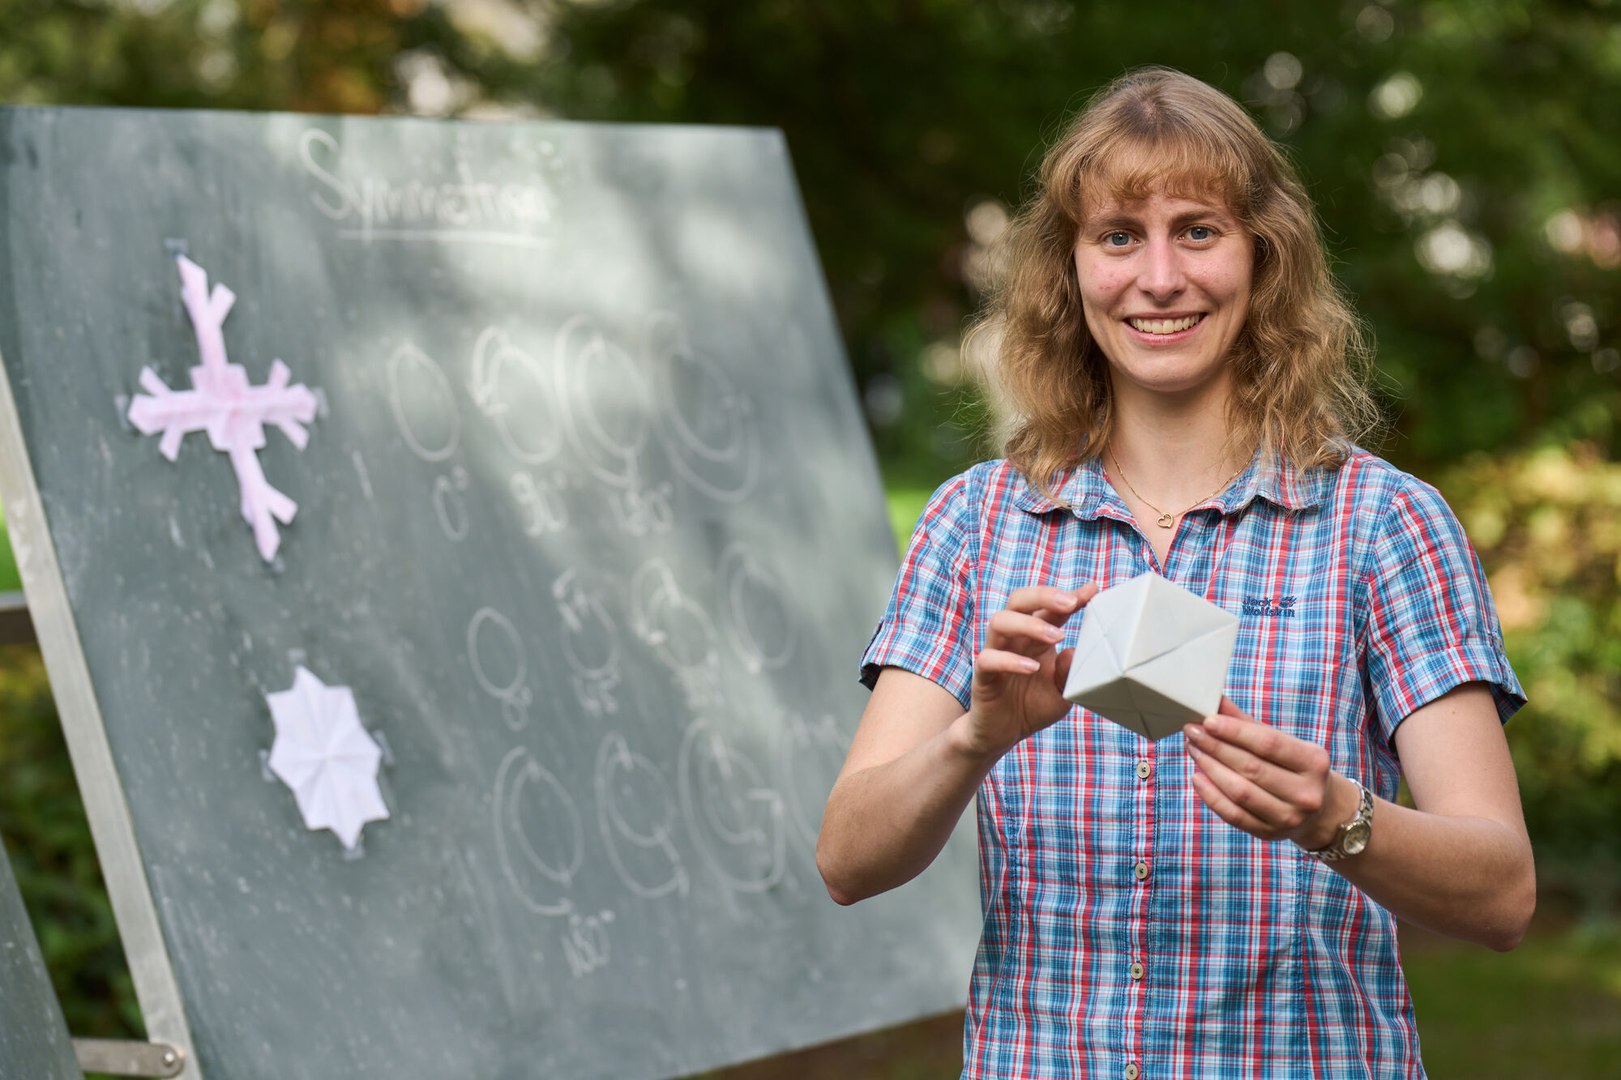 Prof. Dr. Jessica Fintzen in the University of Bonn’s Mathematical Institute and member of the Hausdorff Center for Mathematics (HCM) Cluster of Excellence is awarded an EMS Prize.